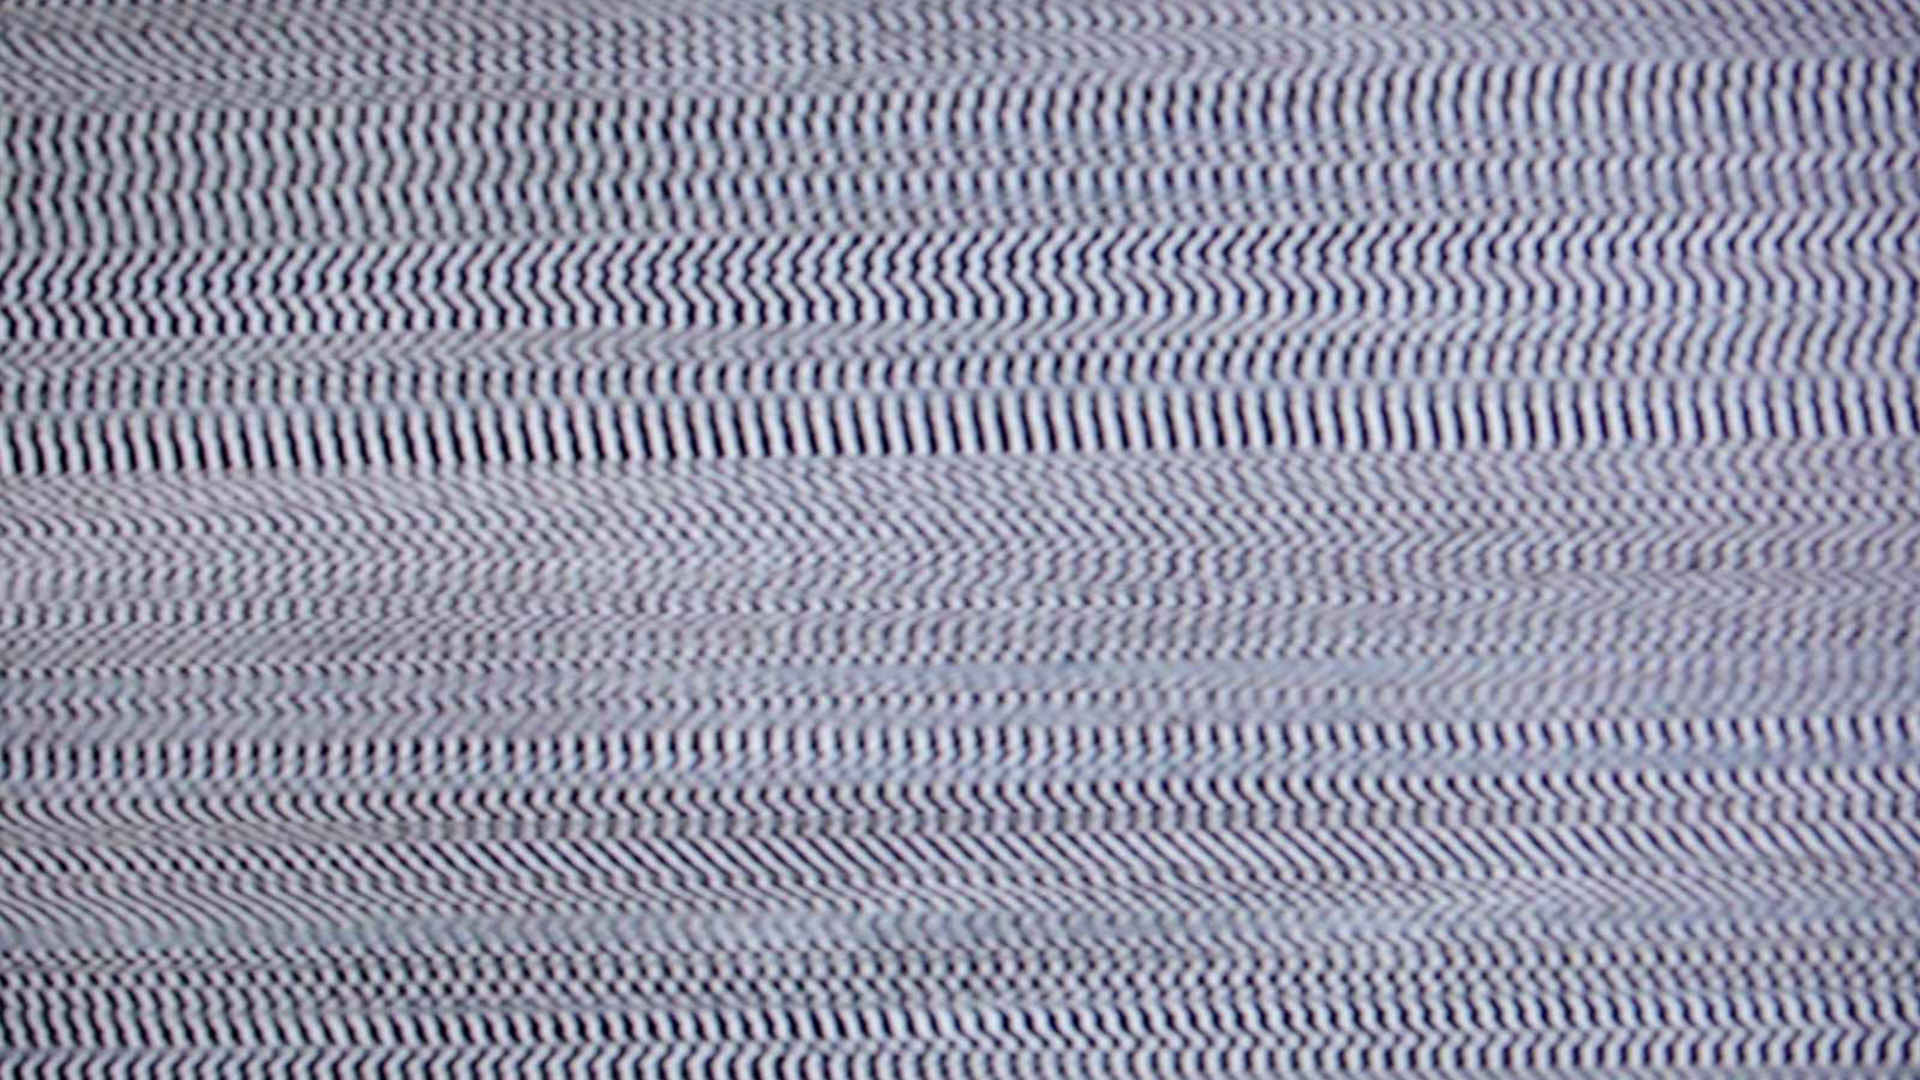 pattern representing noise